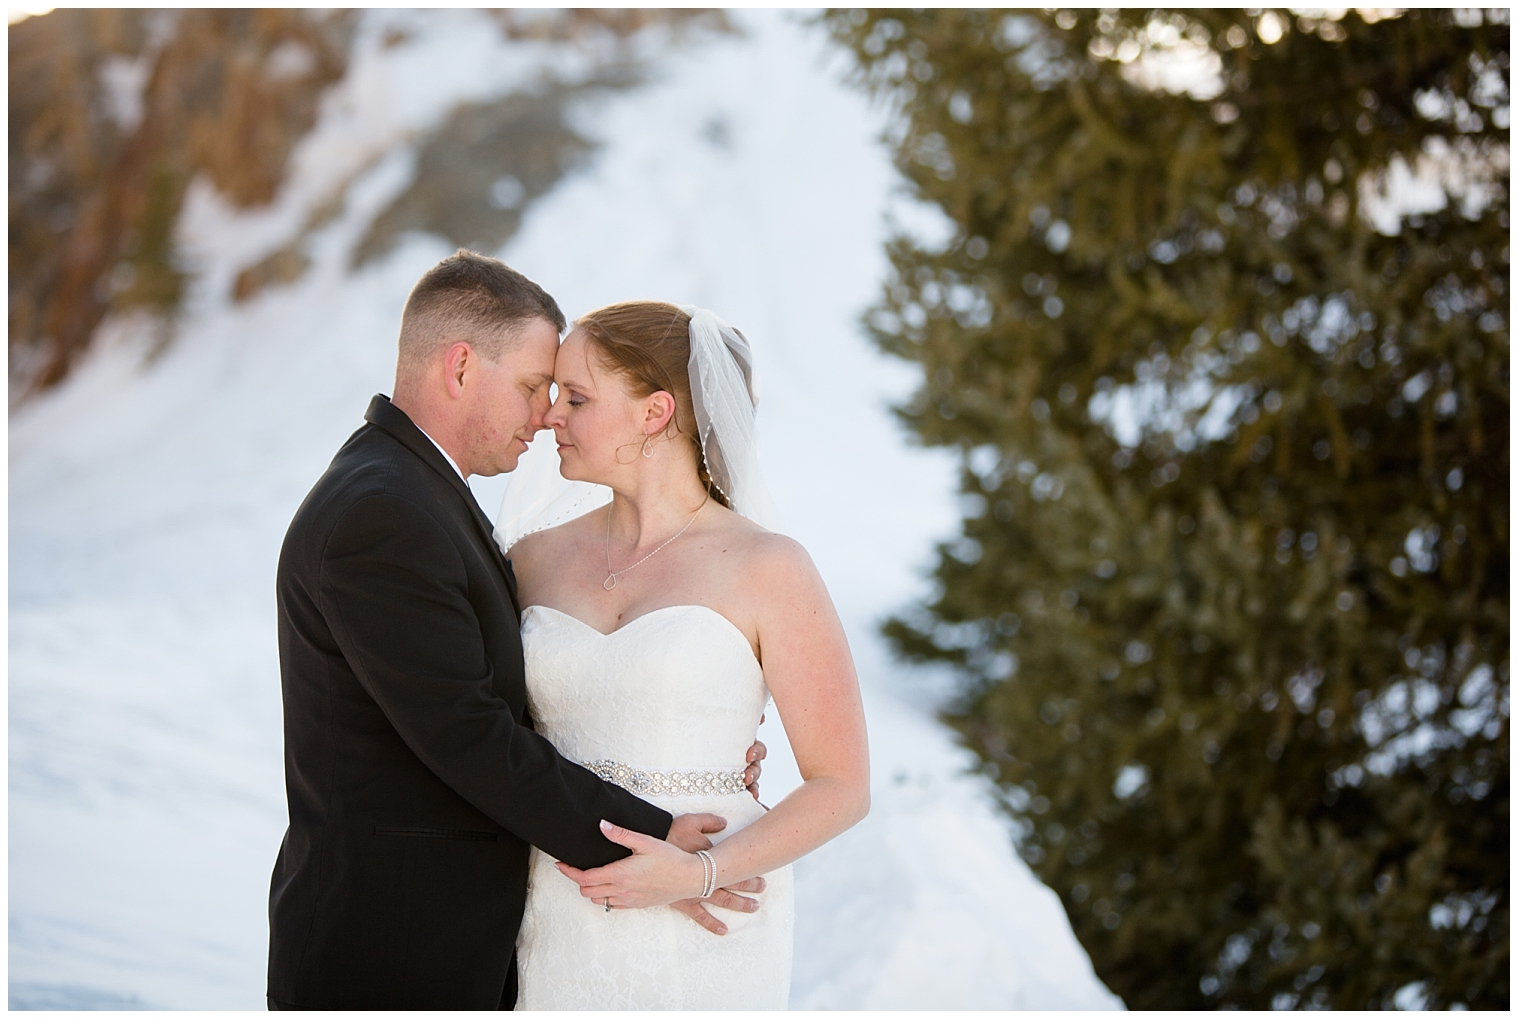 The bride and groom snuggle together during portraits at their Breckenridge Colorado mountain elopement.